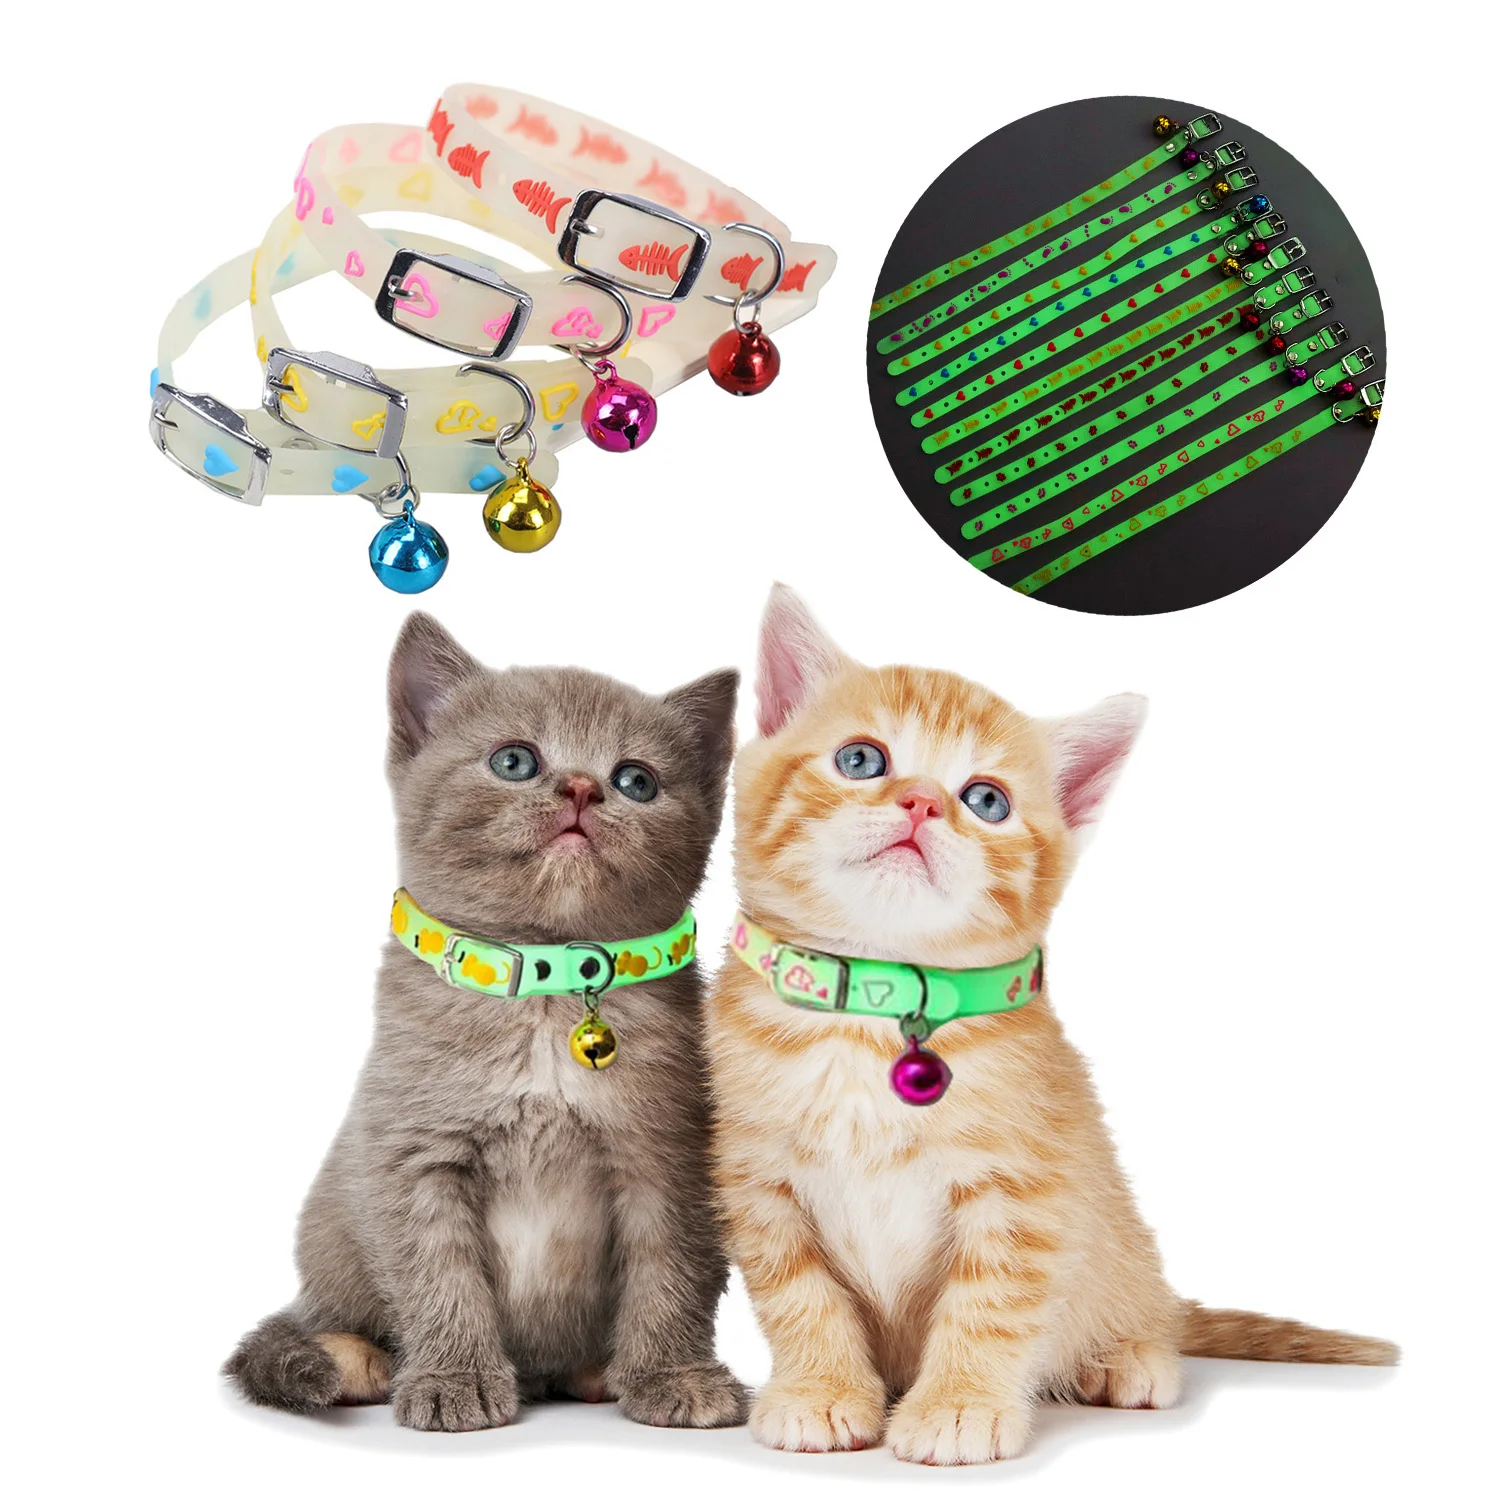 

Pet Dog Cat Glowing Collars with Bells Glow at Night Adjustable Fluorescent Silicone Necklace Pet Light Luminous Neck Ring